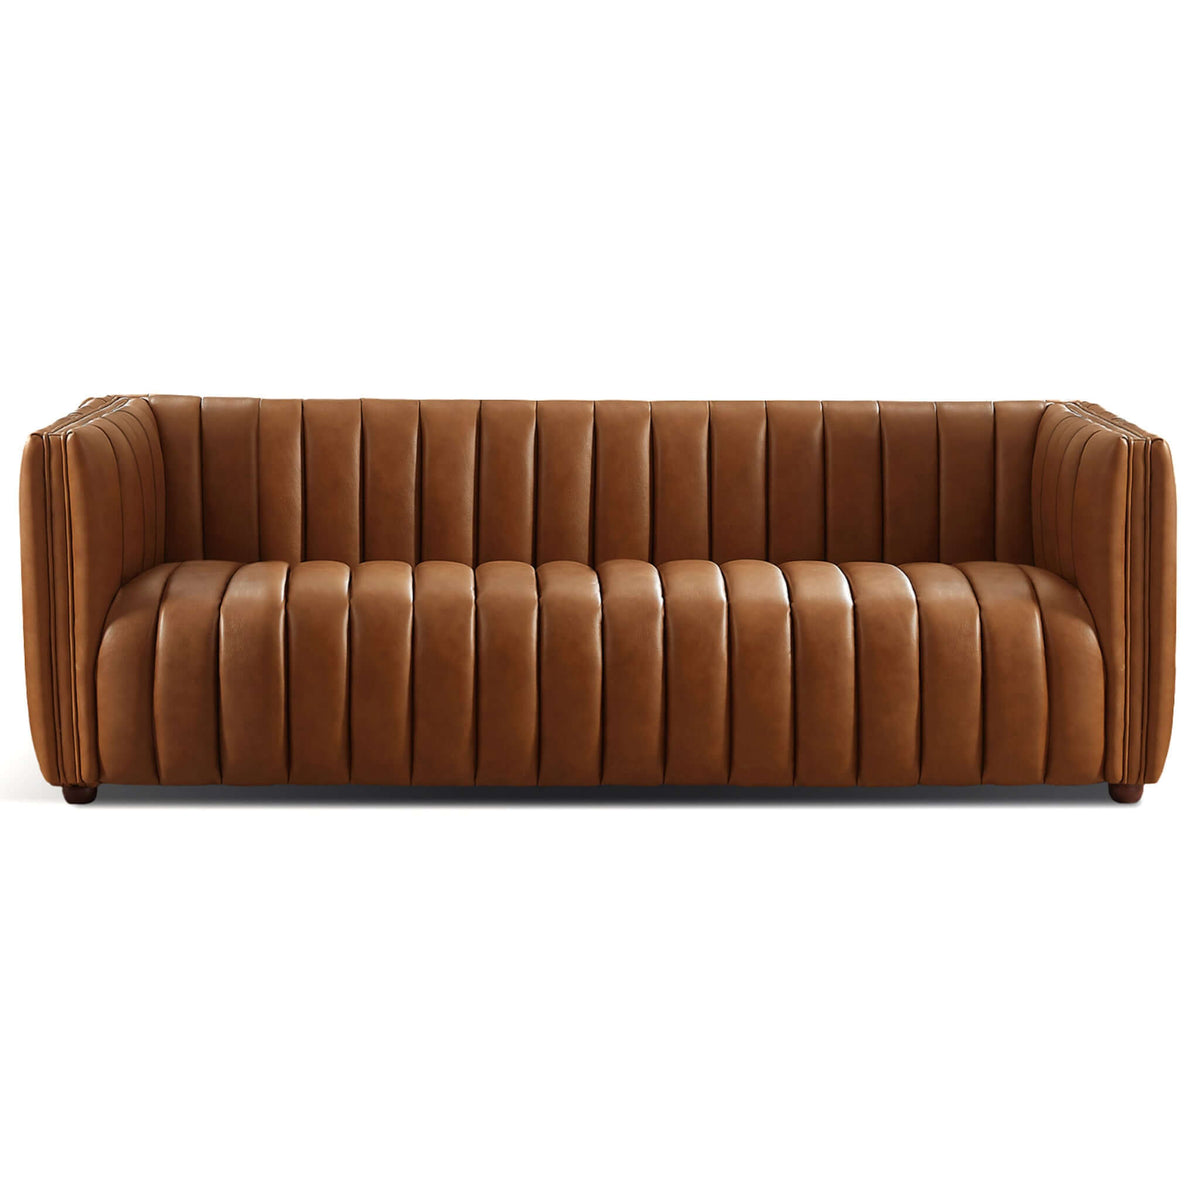 April Mid Century Modern Luxury Tight Back Tan Leather Couch